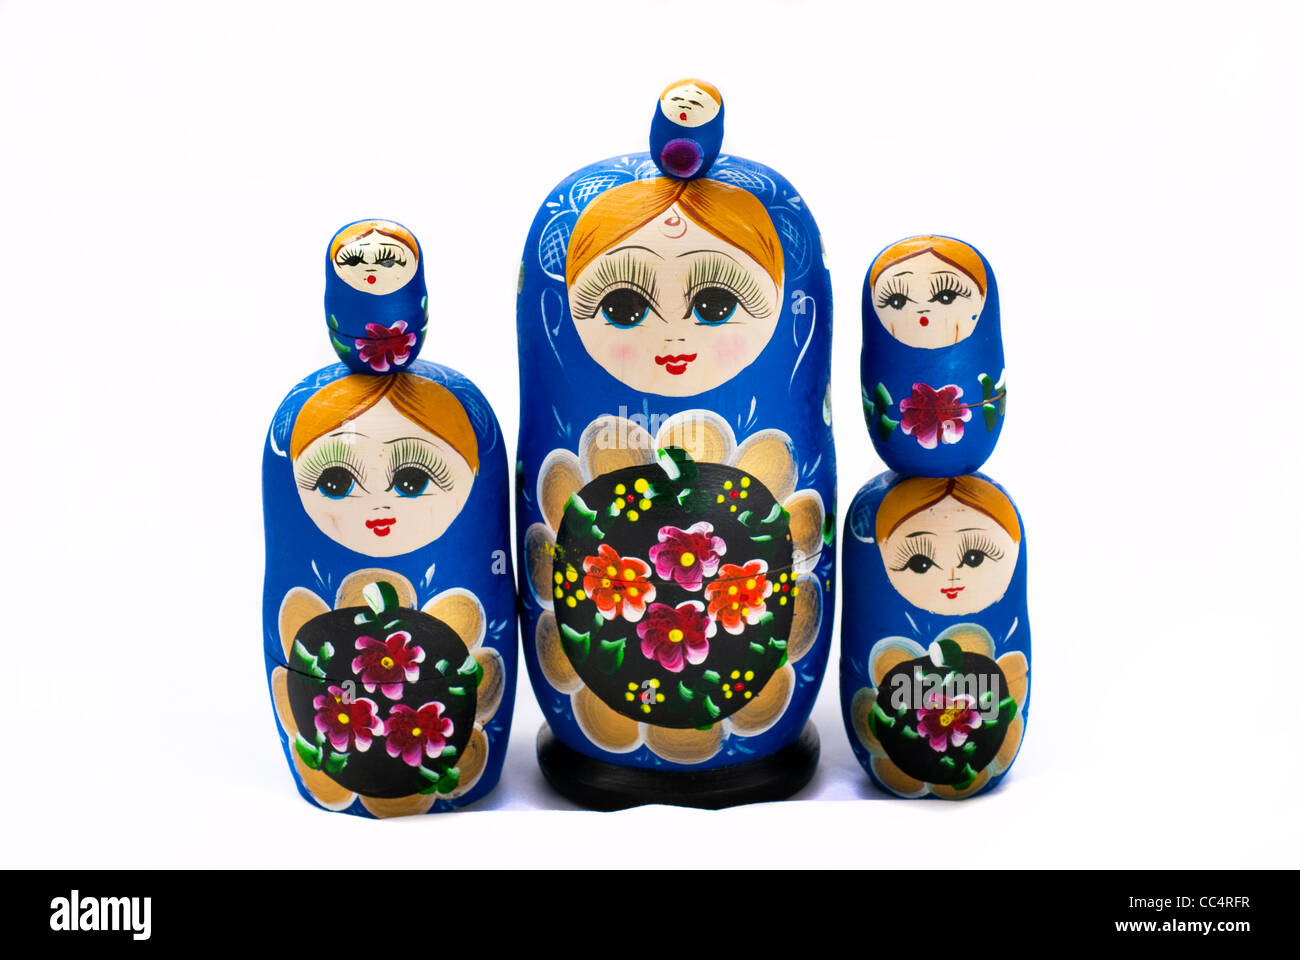 These little Russian Dolls are stacked and ready to play with Stock Photo